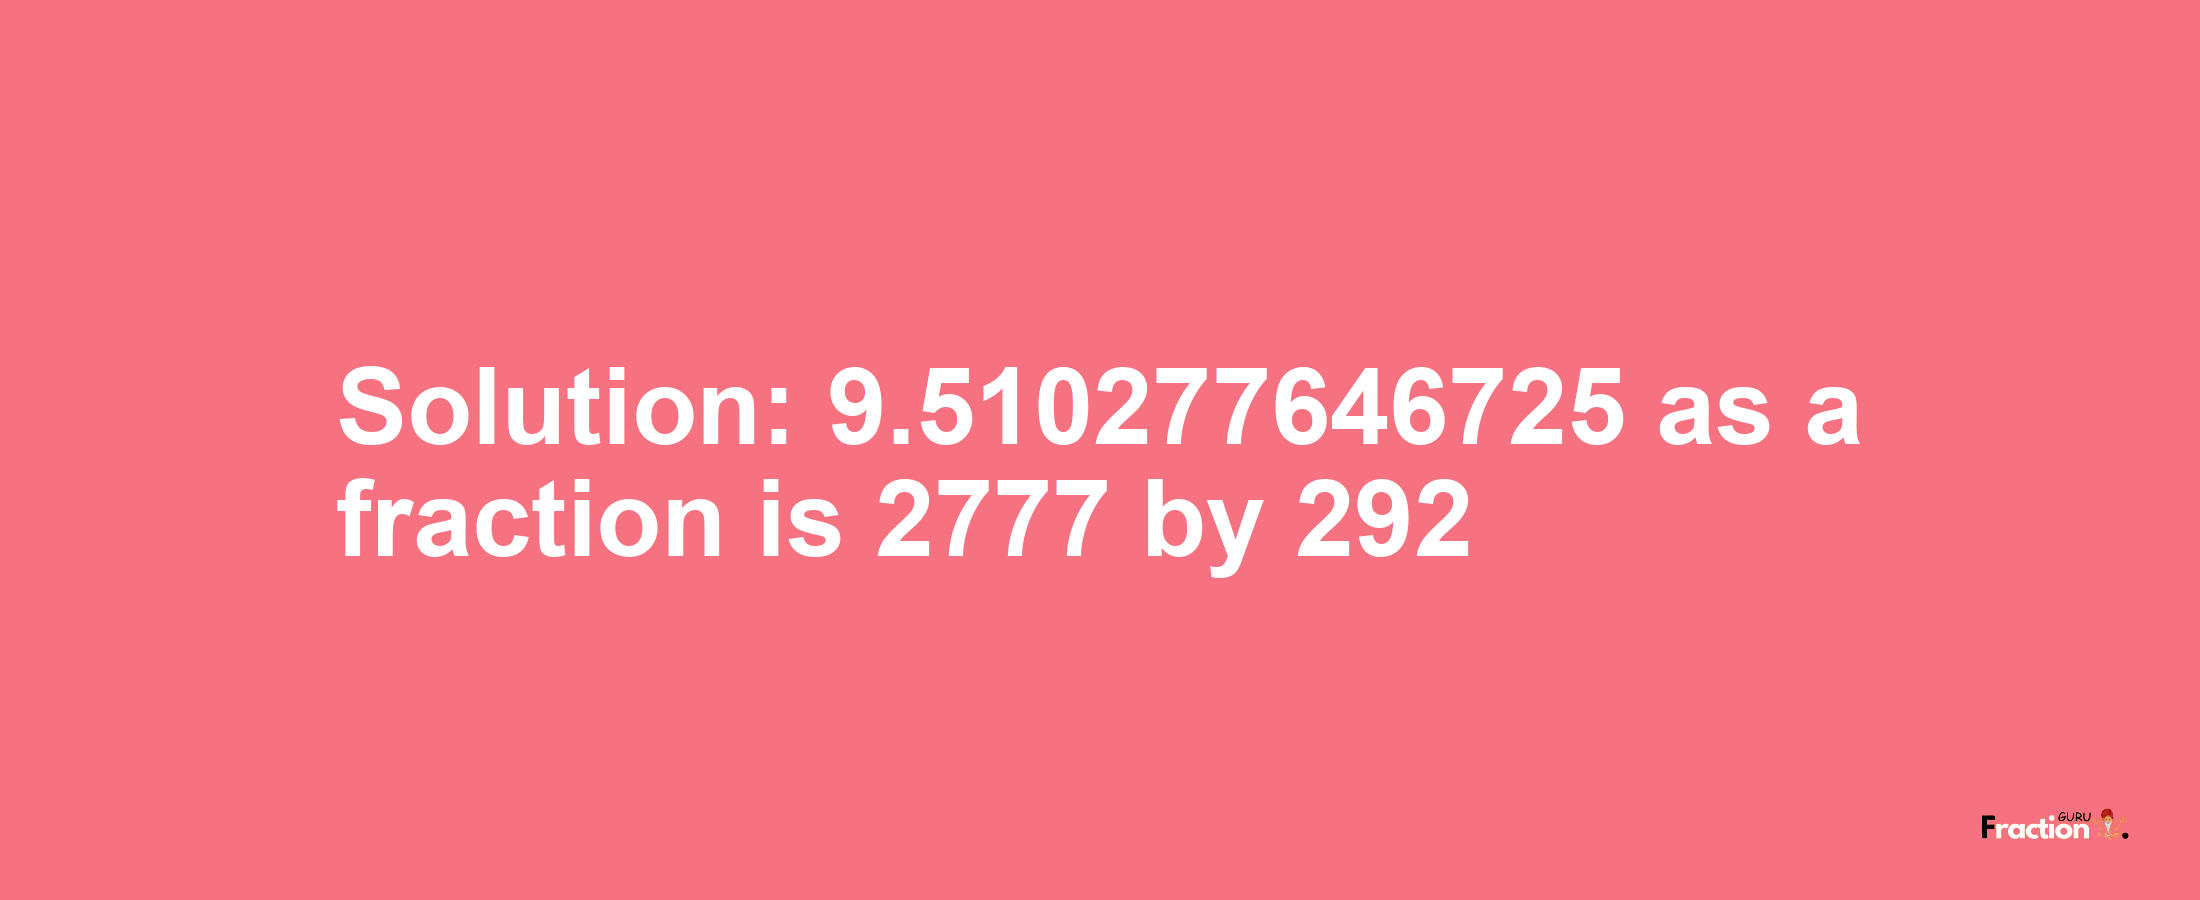 Solution:9.510277646725 as a fraction is 2777/292